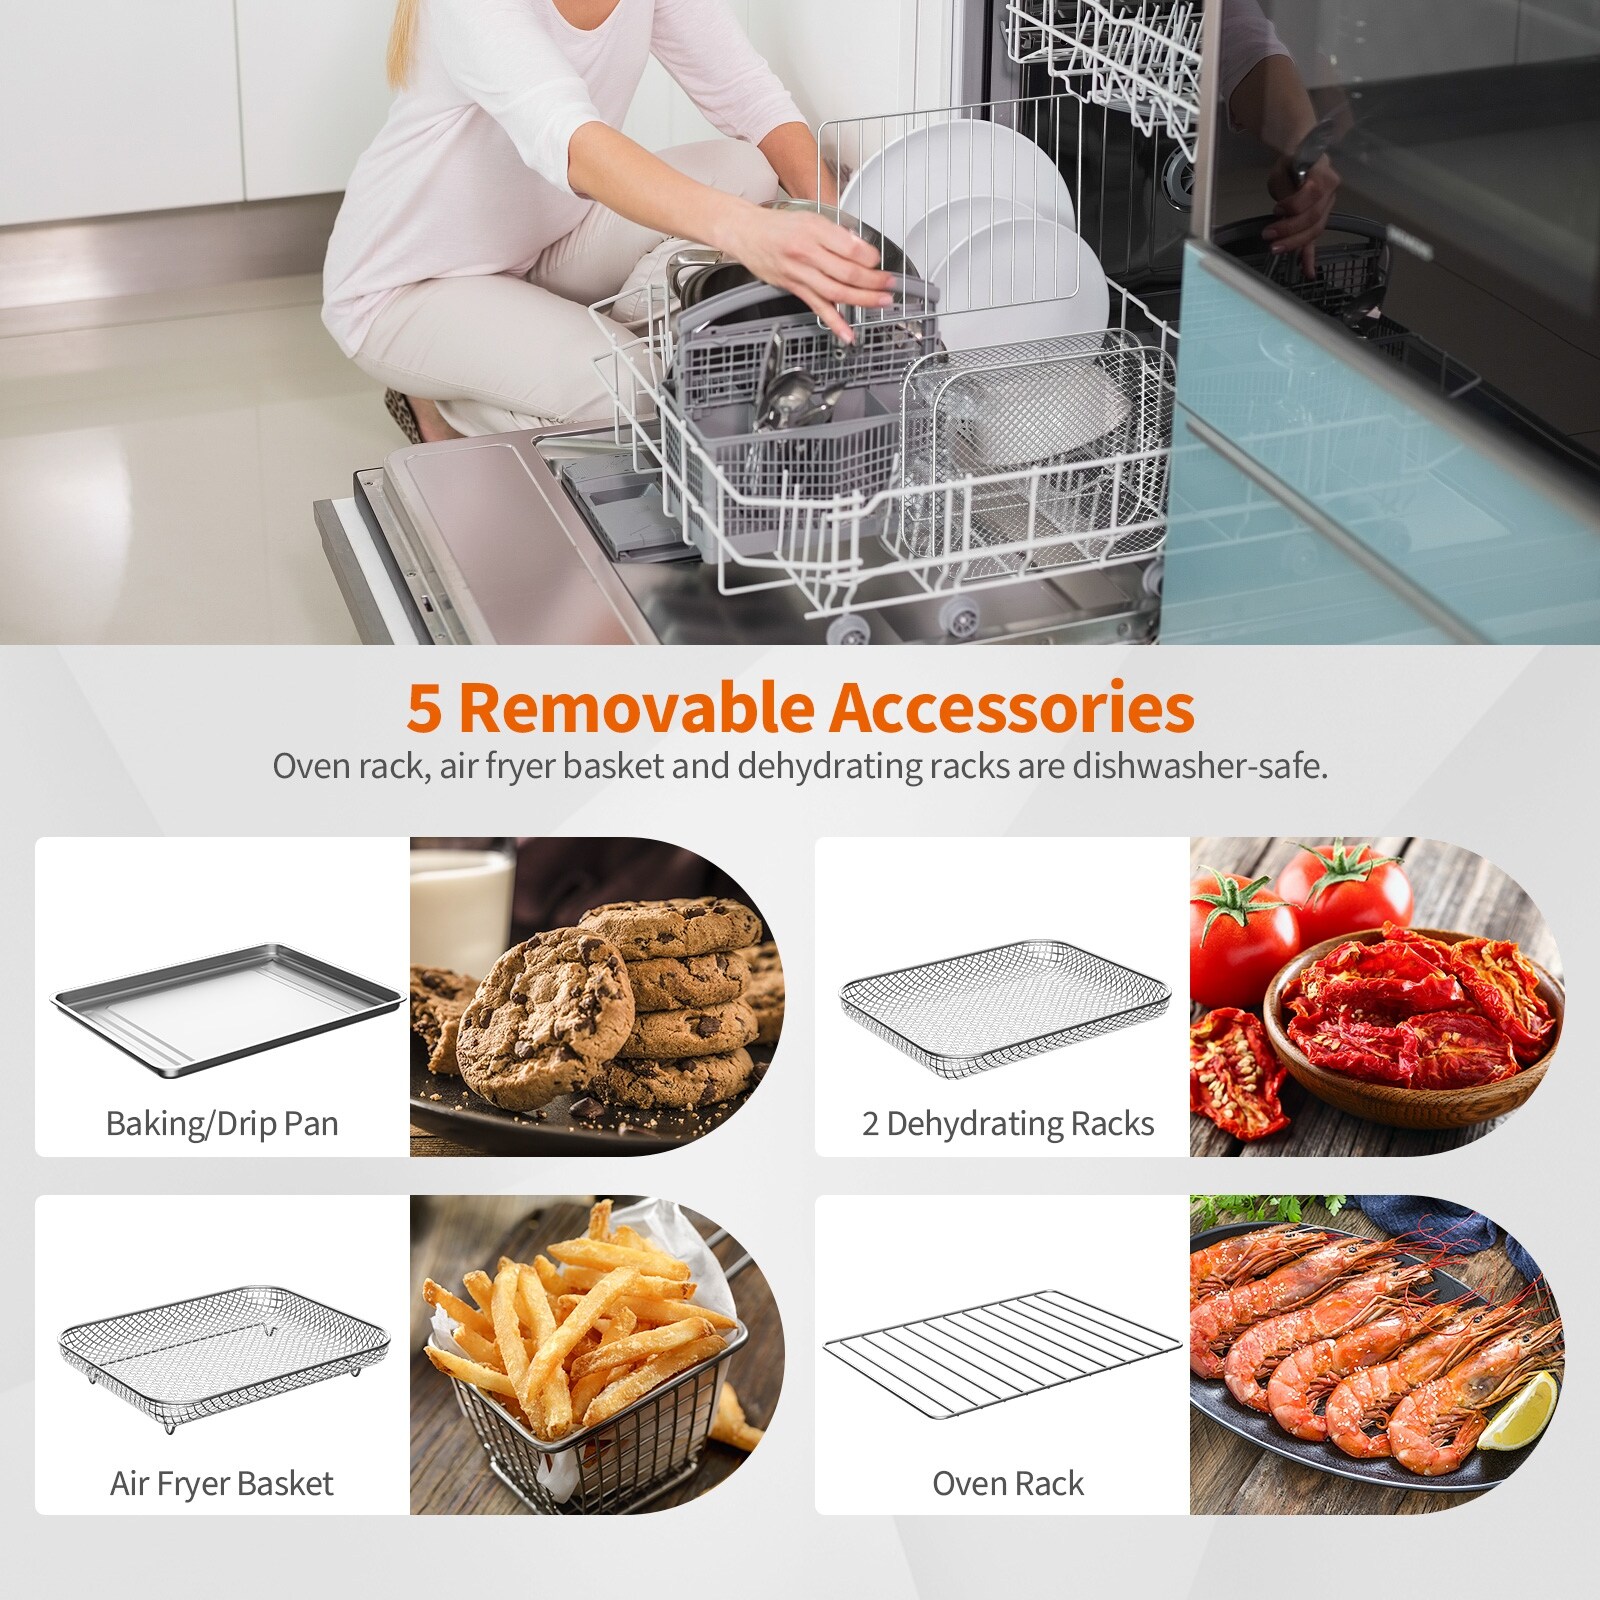 https://ak1.ostkcdn.com/images/products/is/images/direct/9f5aab96b622cc7d8695514e5e08a5b8b6c75a88/Costway-21QT-Convection-Air-Fryer-Toaster-Oven-8-in-1-w--5-Accessories.jpg